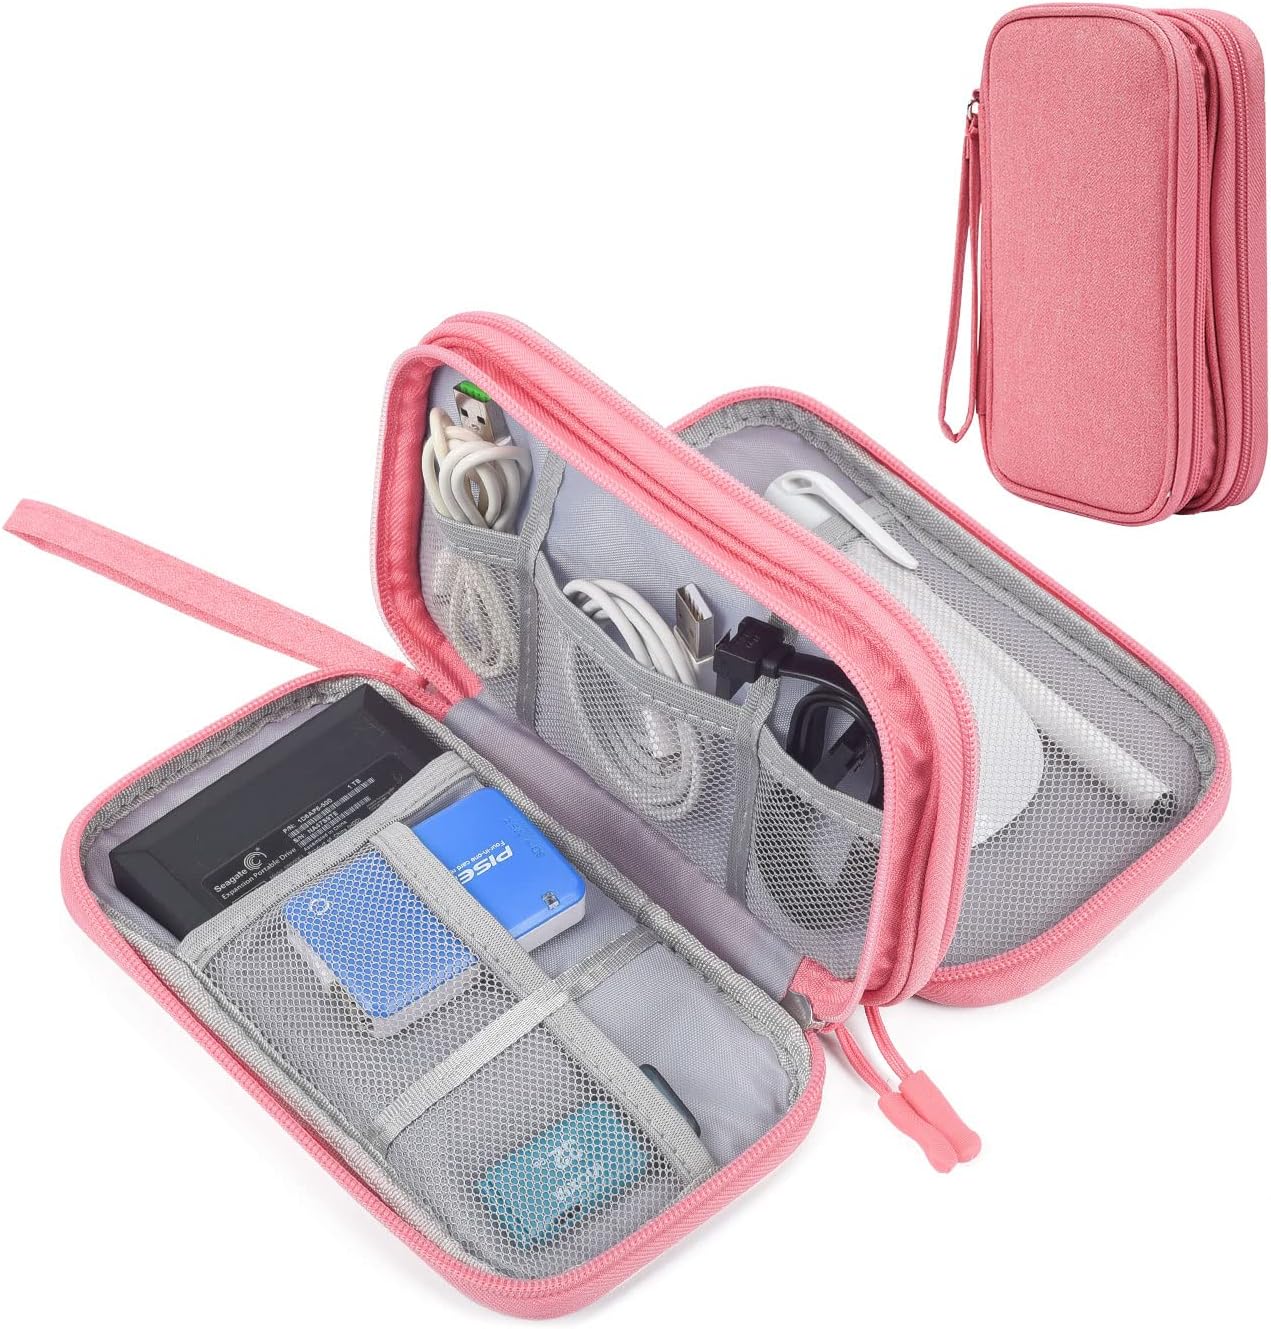 Electronic Organizer Travel USB Cable Accessories Bag/Case,Waterproof for Power Bank,Charging Cords,Chargers,Mouse ,Earphones Flash Drive